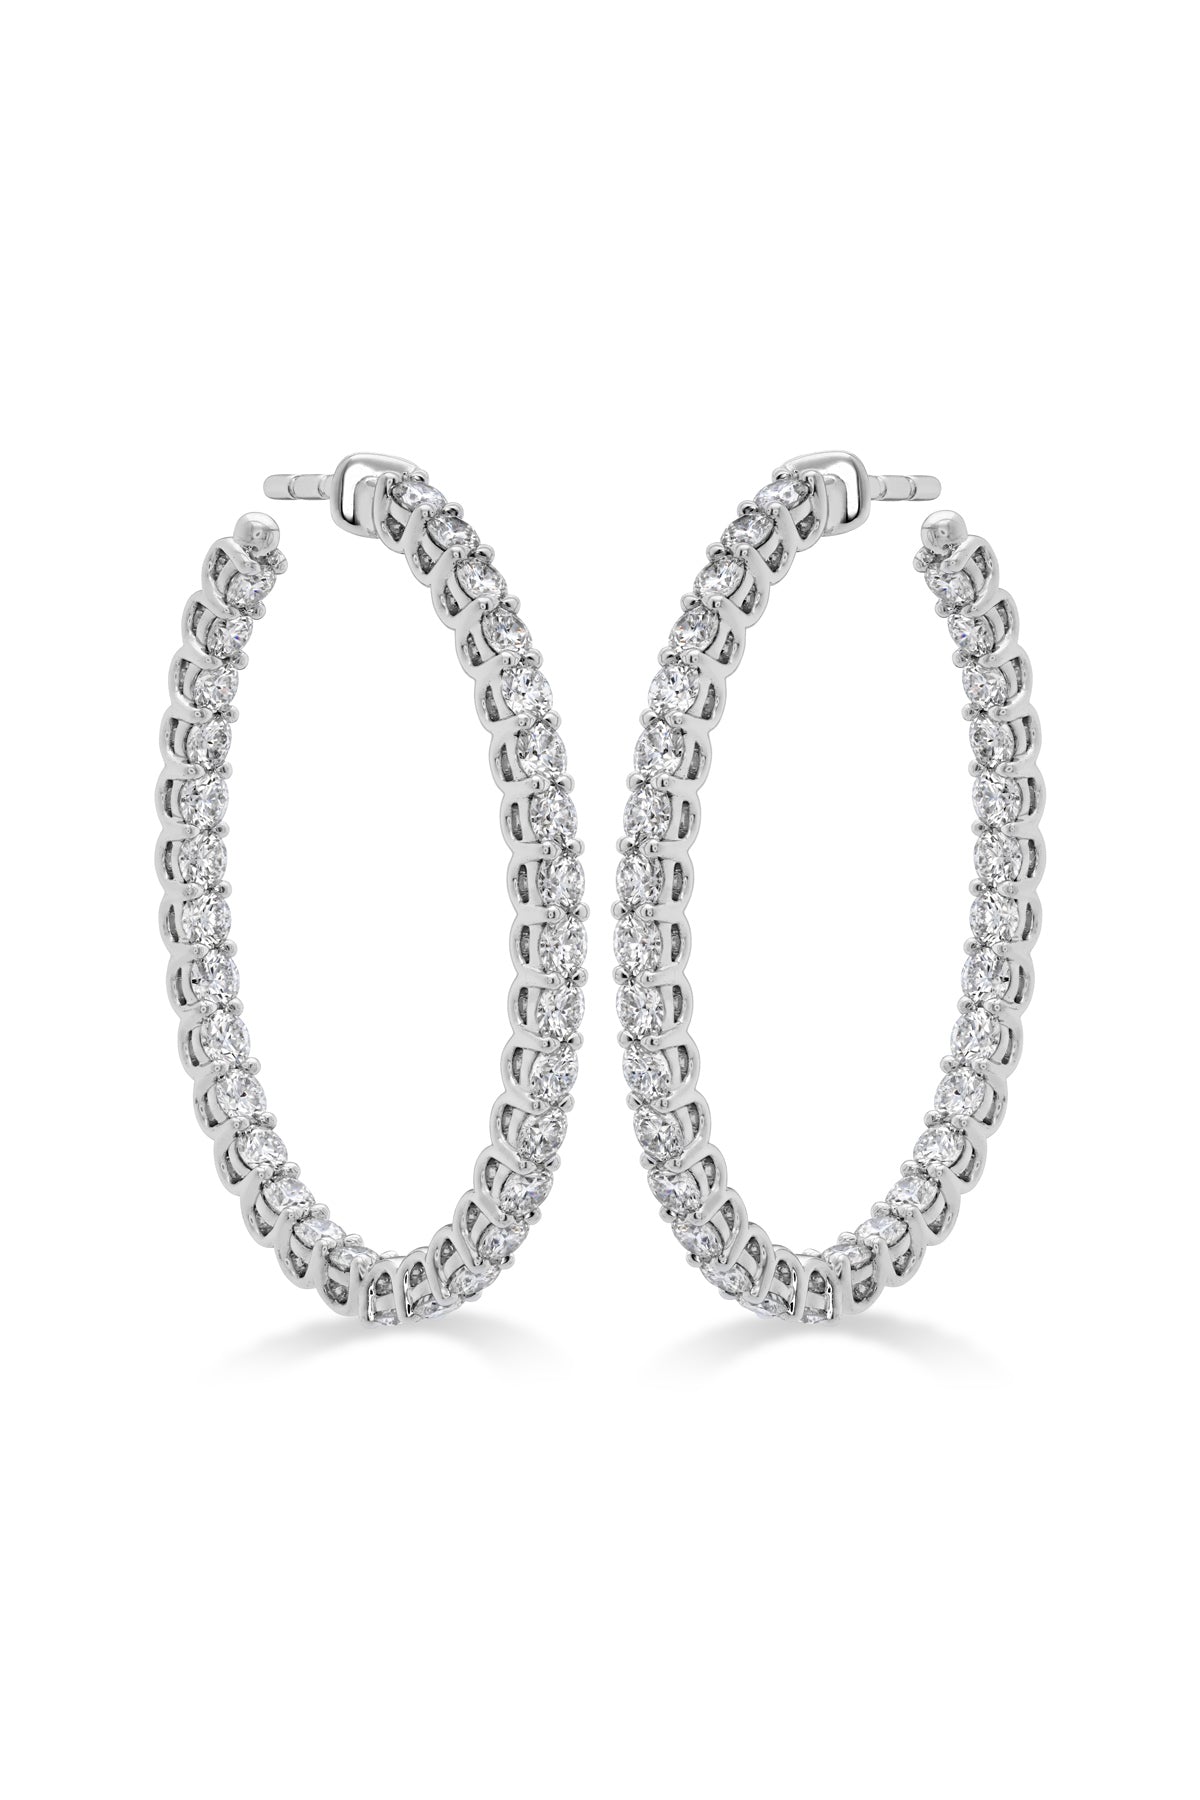 Large Signature Oval Hoop Earrings From Hearts On Fire available at LeGassick Diamonds and Jewellery Gold Coast, Australia.